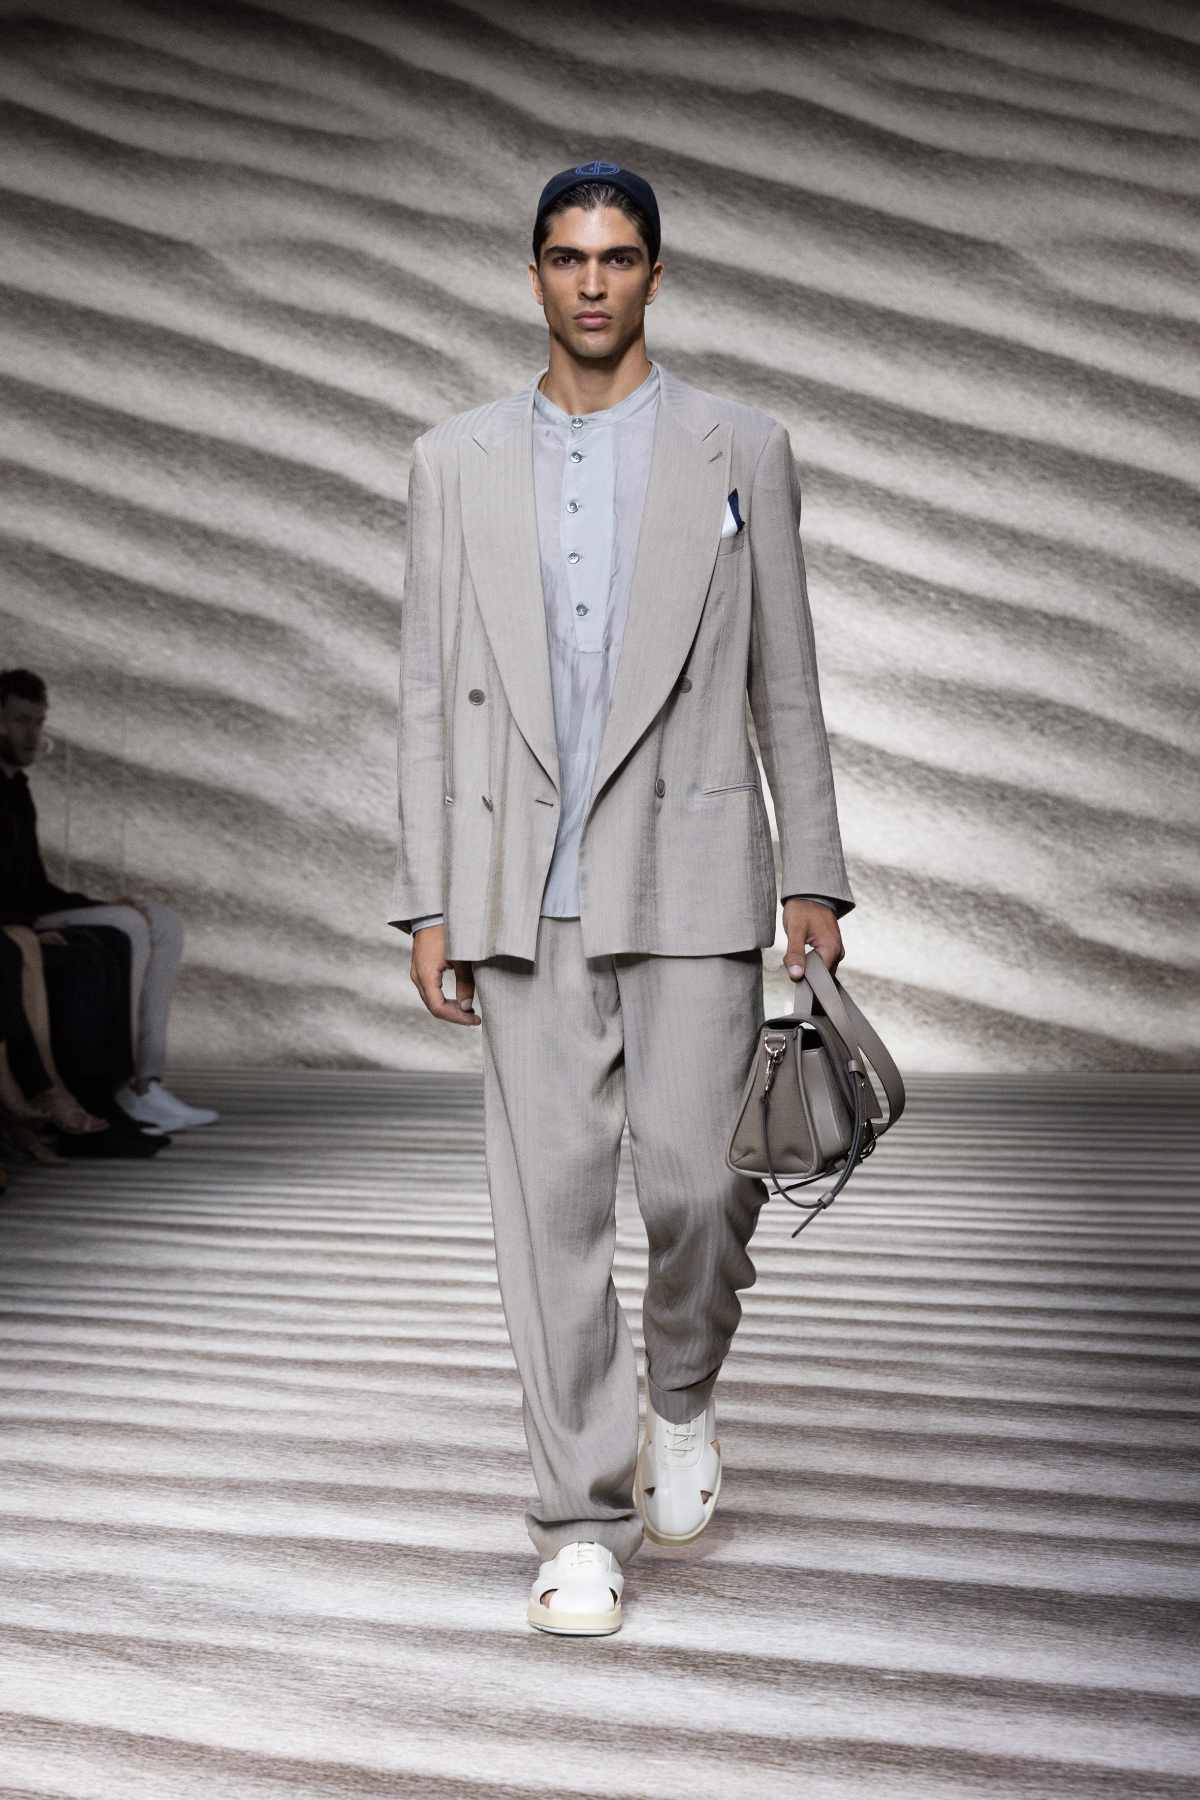 Armani Armani Presents His New Spring Summer 2023 Collection